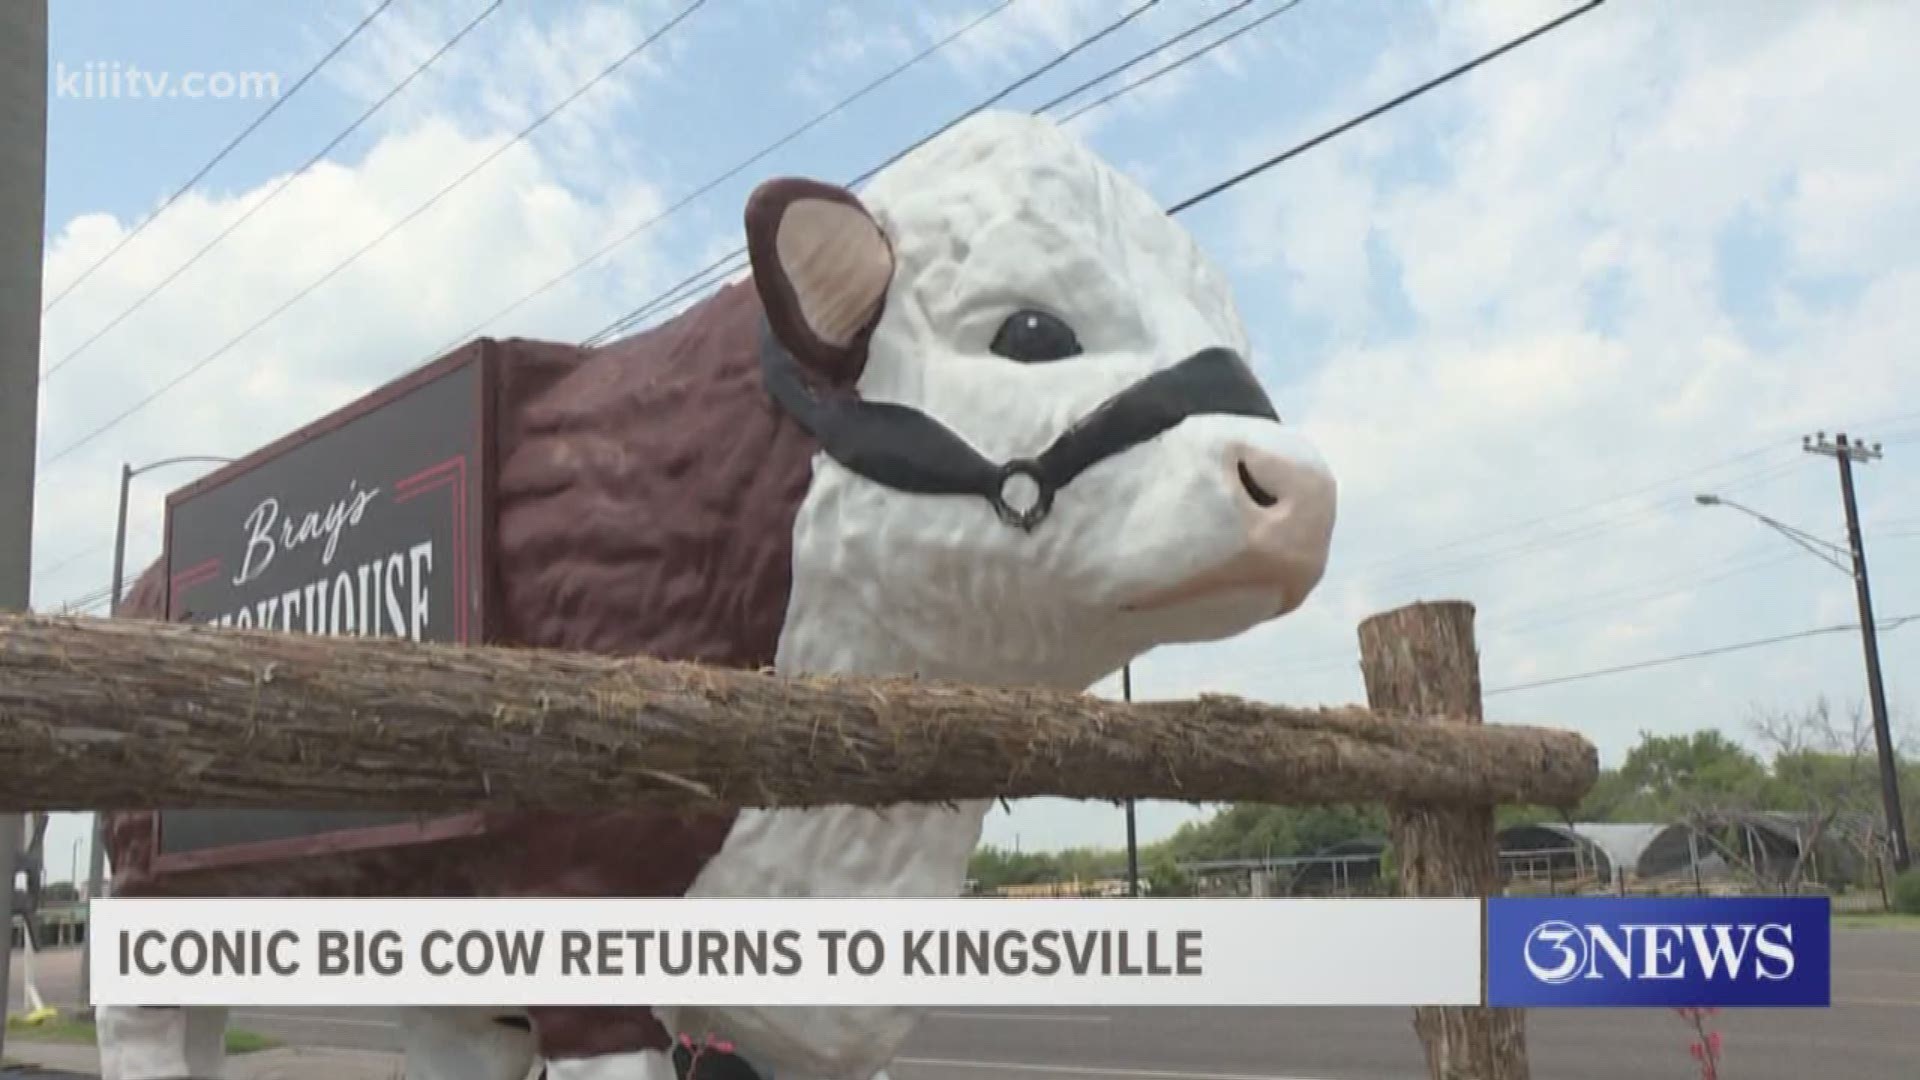 The cow stands 12'4" and is about 16 feet long. Its return is turning heads of drivers passing by and is also creating quite the frenzy on social media.